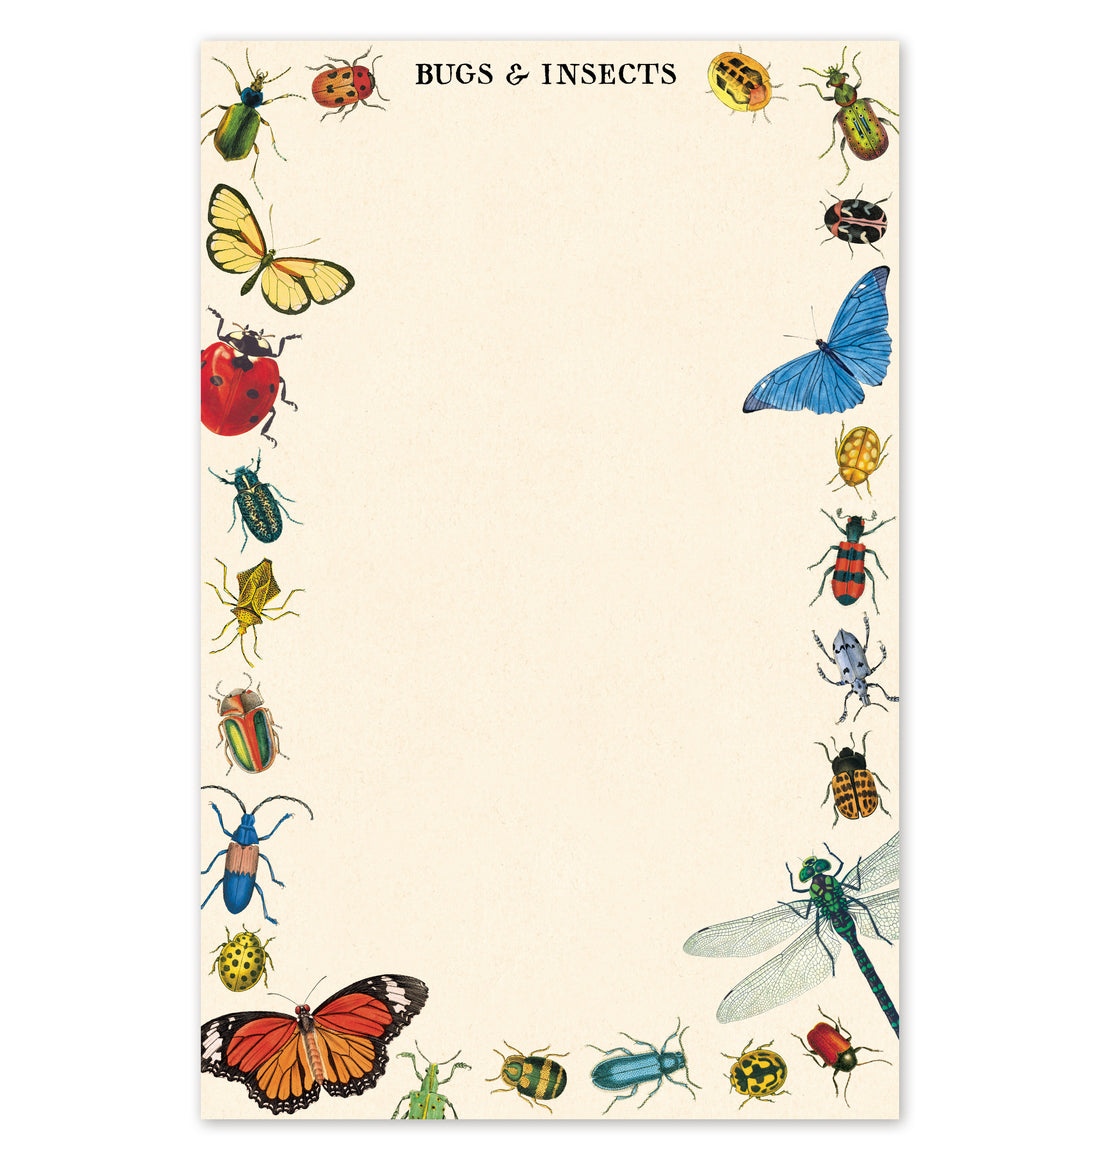 Bugs &amp; Insects Notepad from Cavallini Papers &amp; Co archives, bordered with illustrated bugs and insects for nature lovers.